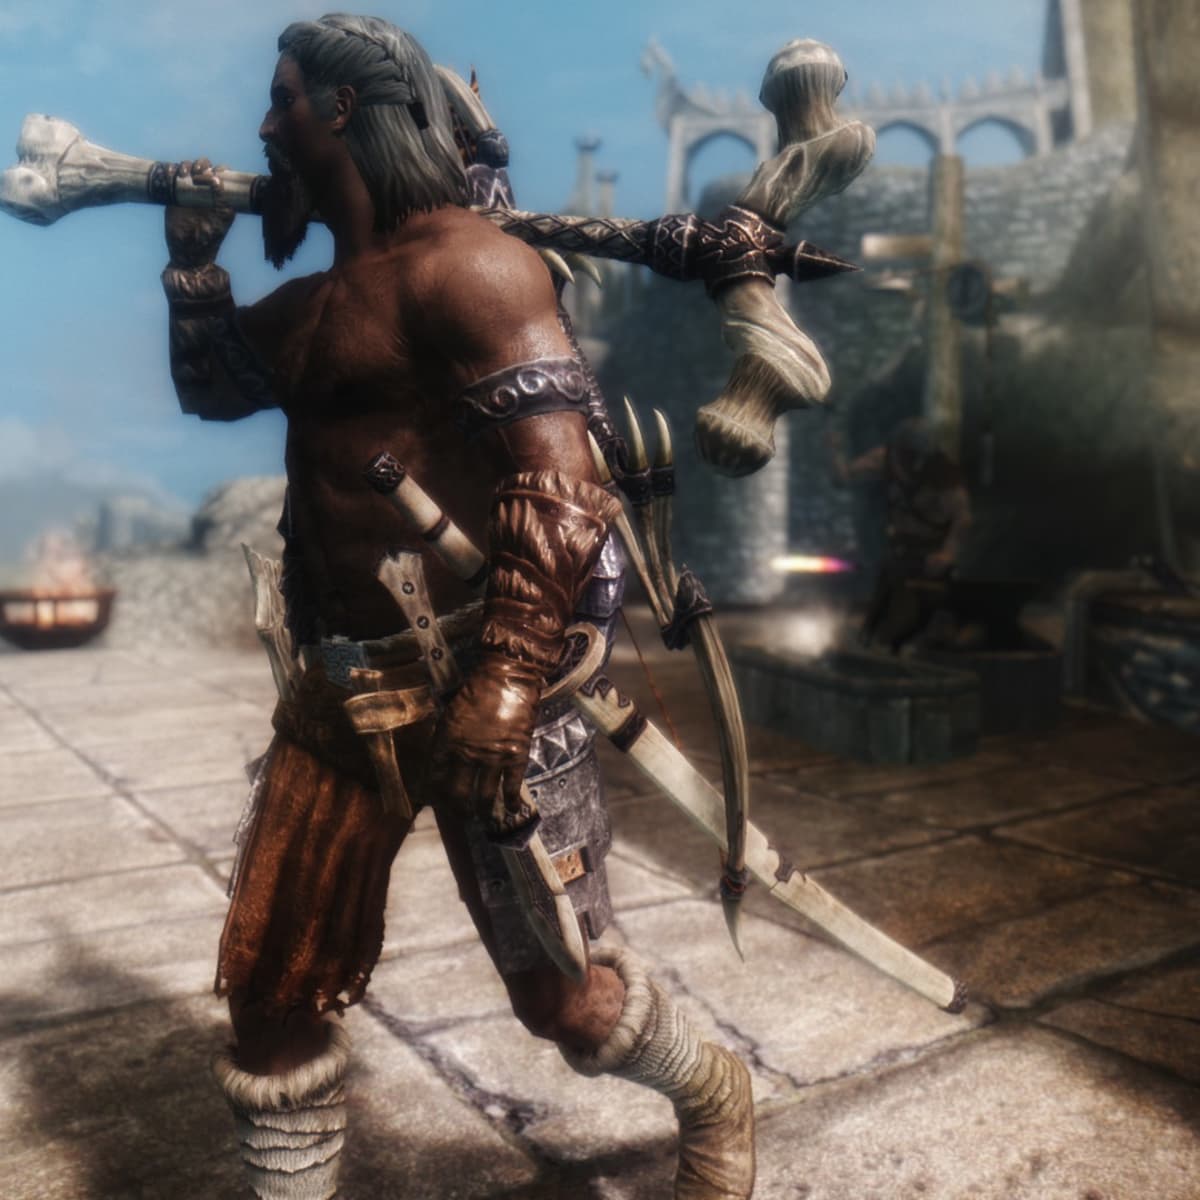 Mods to Improve Appearance of and Customise Your Skyrim Player Character -  HubPages